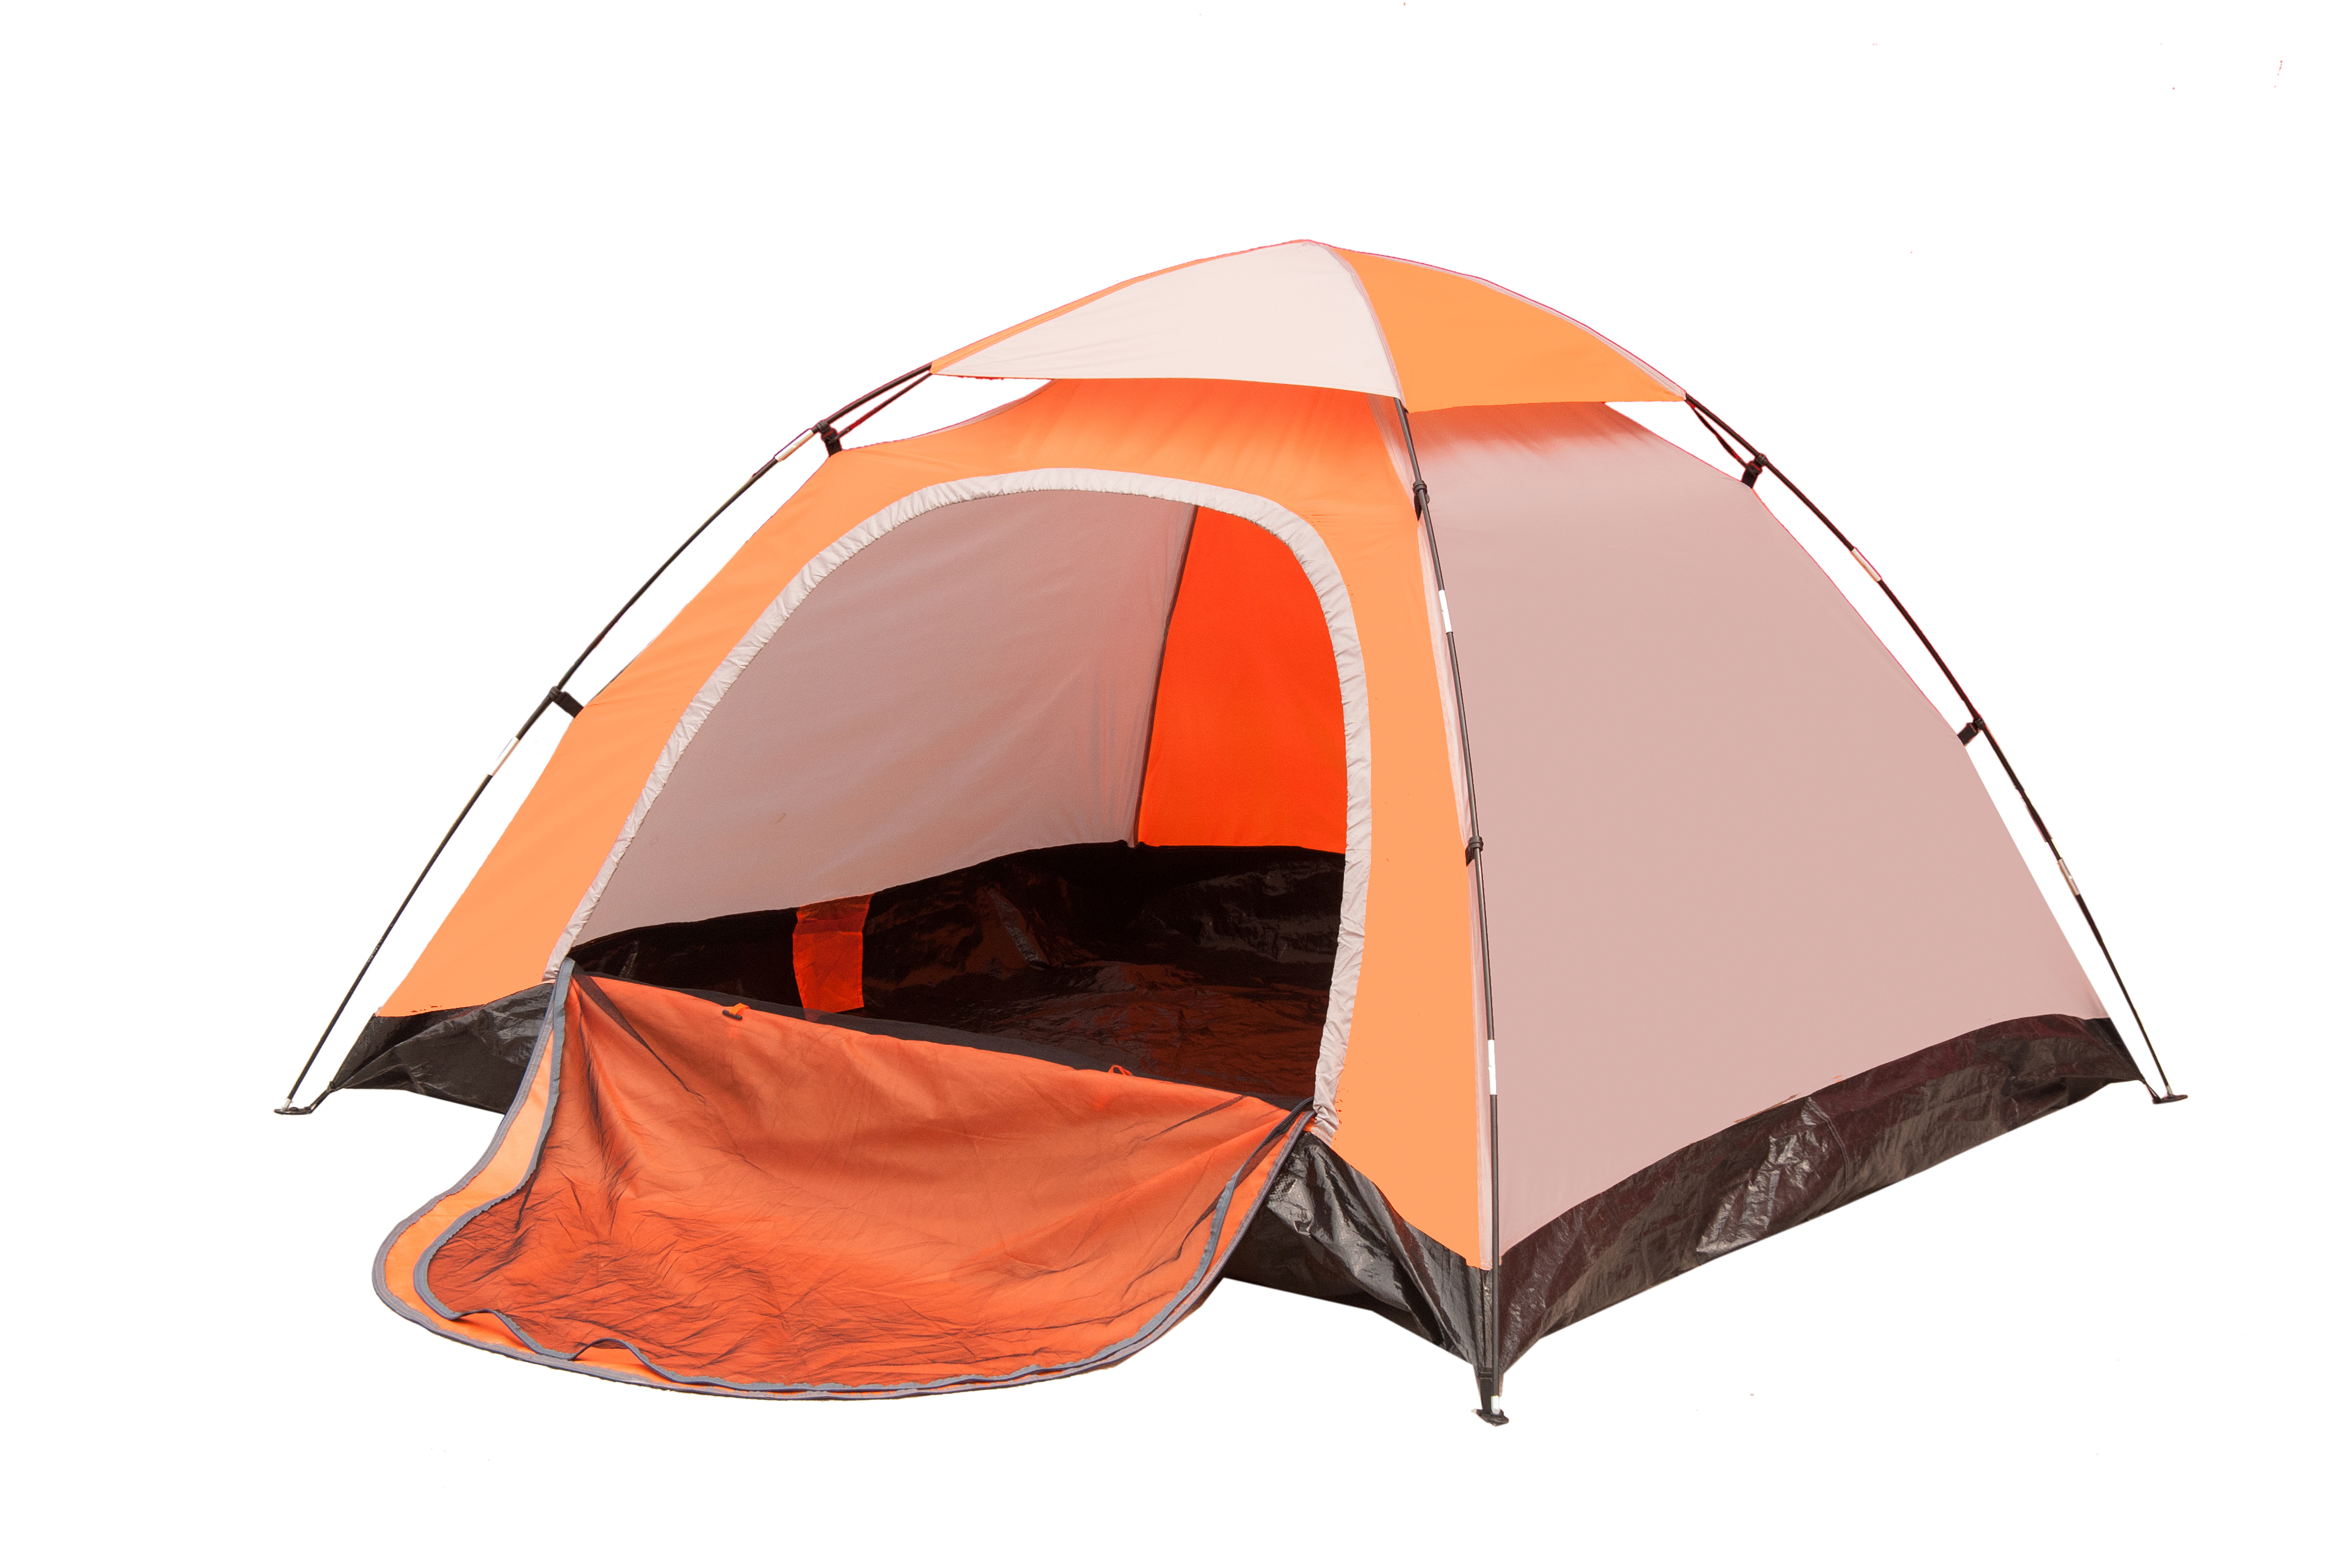 iCorer Waterproof Lightweight 2-3 Person Family Backpacking Camping Tent, 78.7" x 78.7" x 51" - image 1 of 8